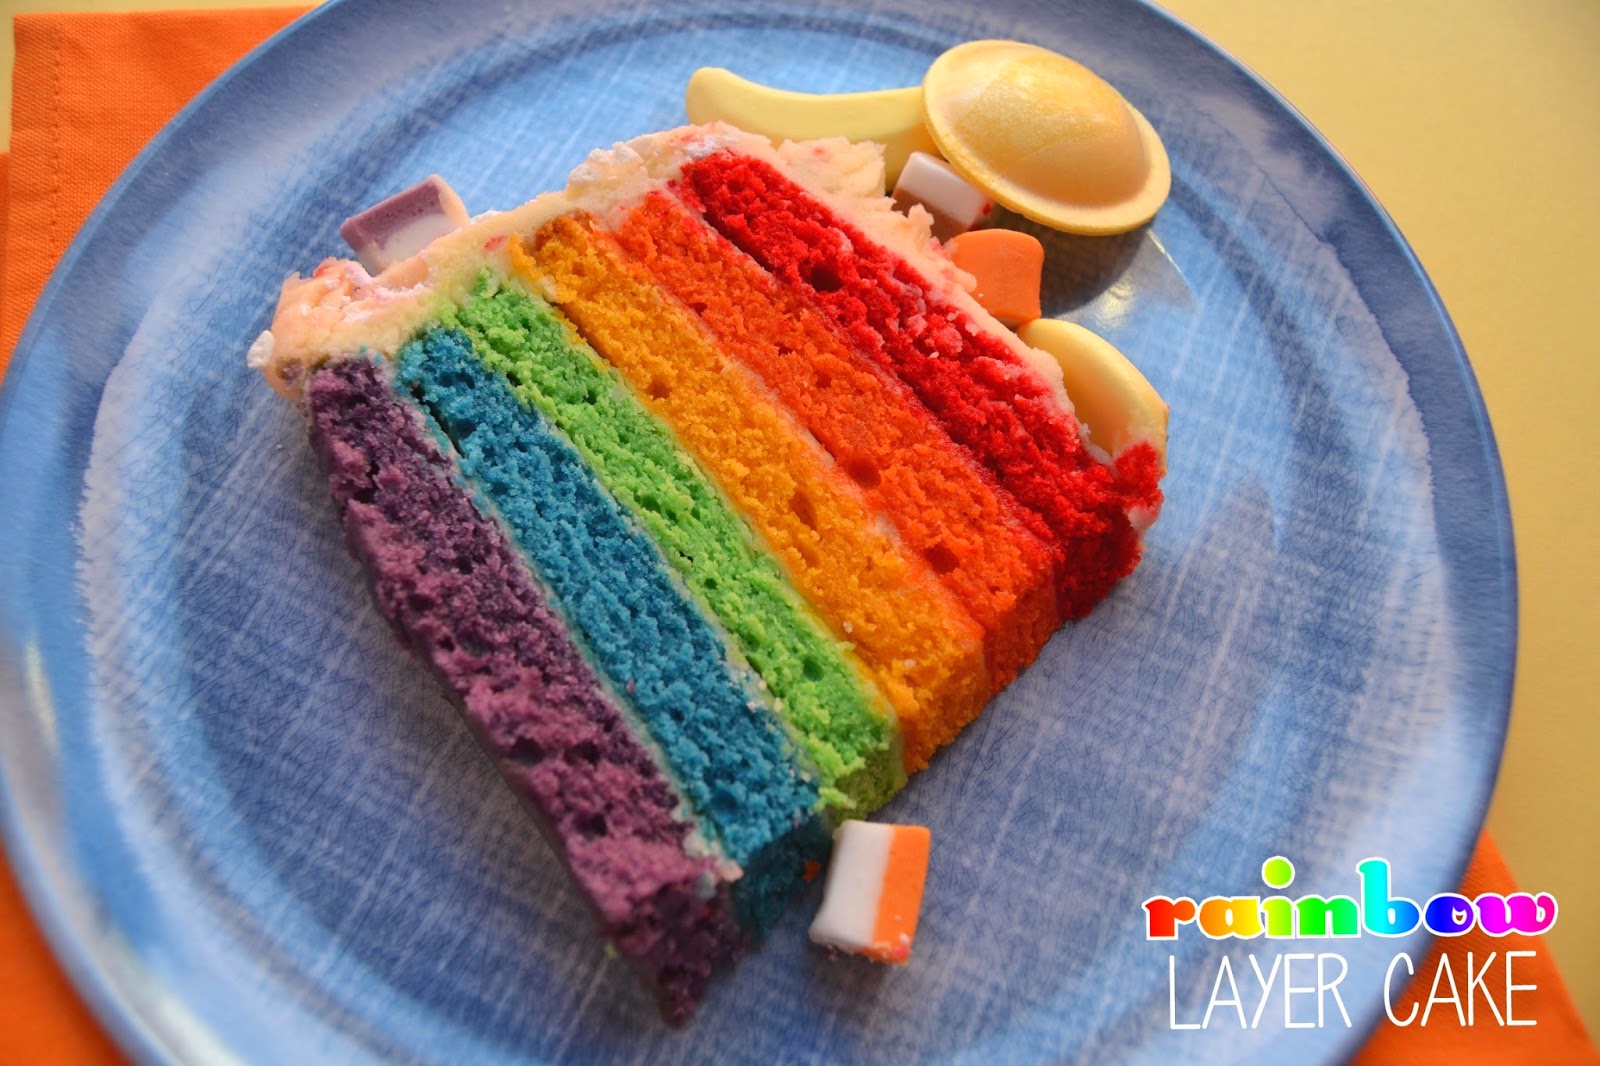 Tips on making a rainbow layer cake